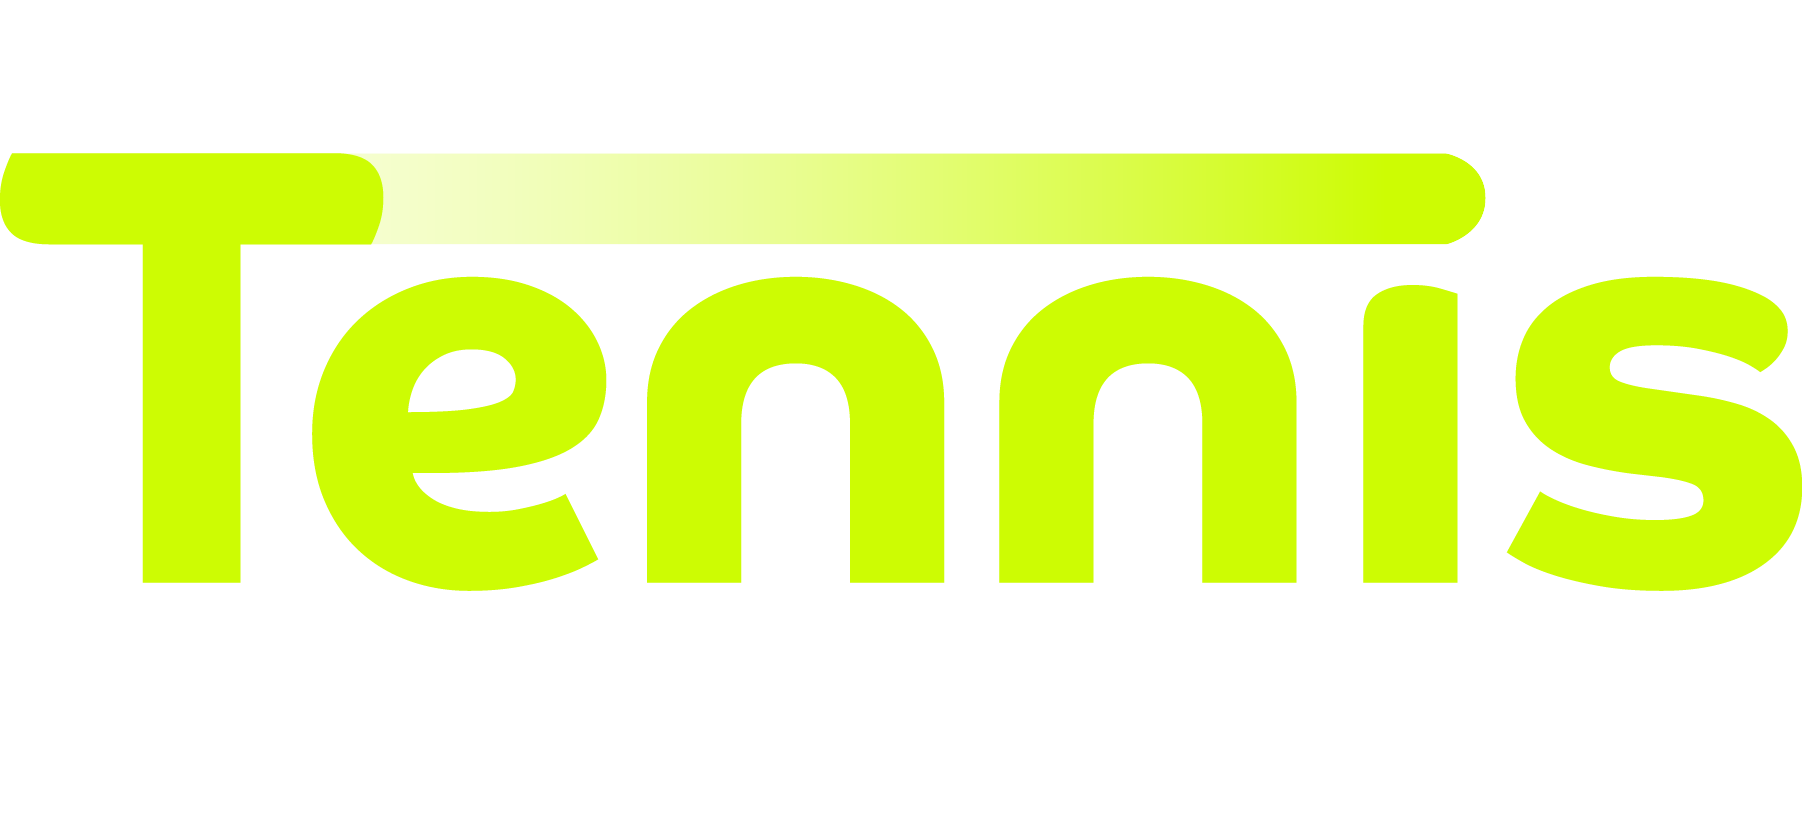 Friends of The Tennis Podcast